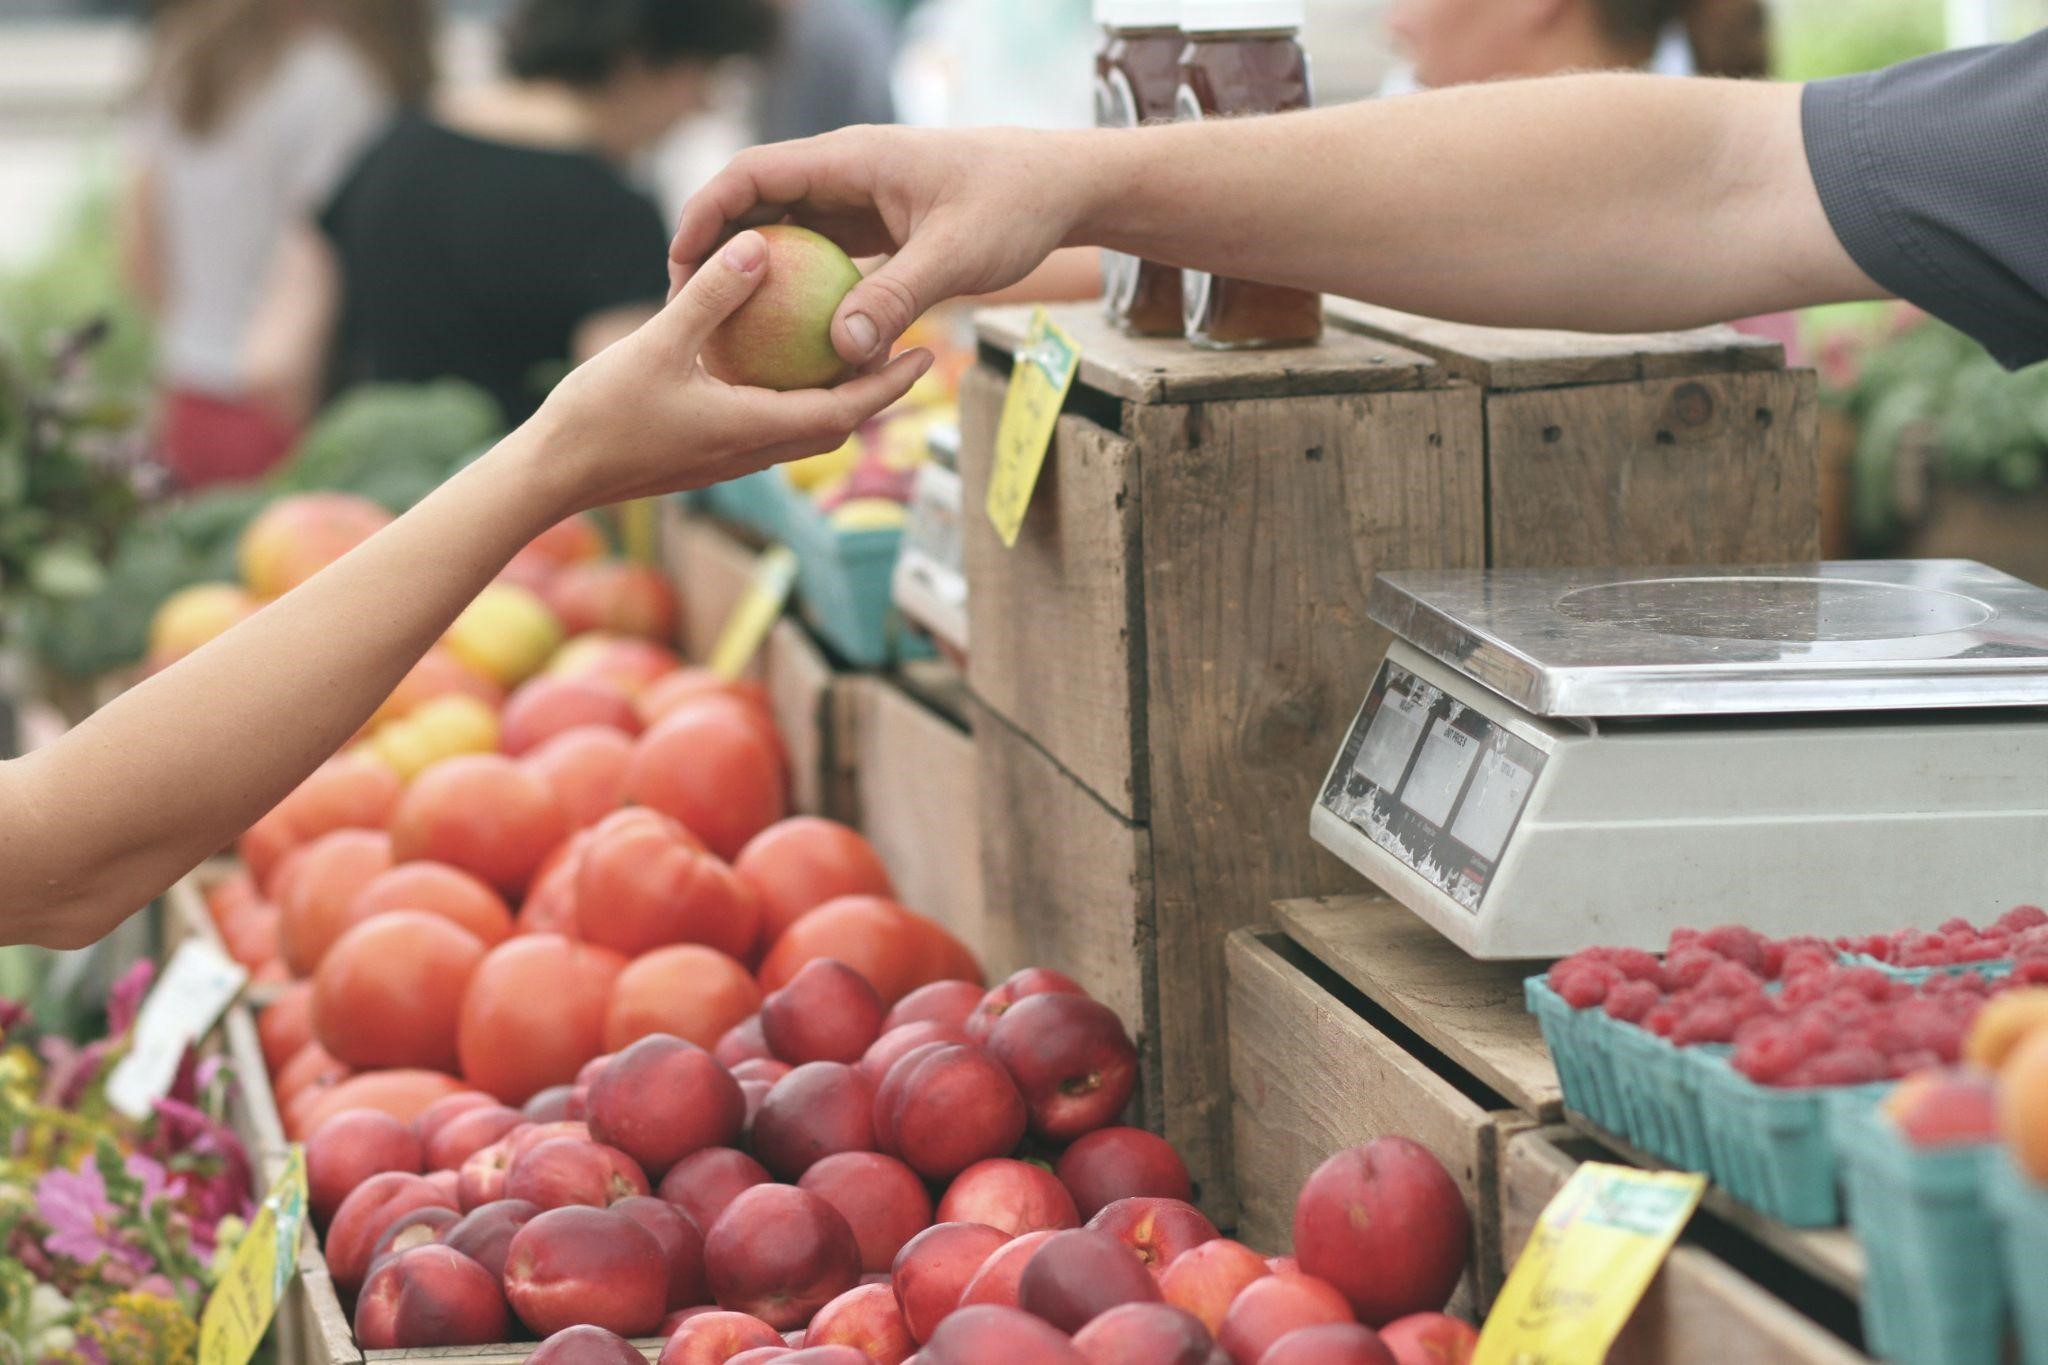 How To Buy Groceries On A Budget Smart Strategies For Savvy Shoppers